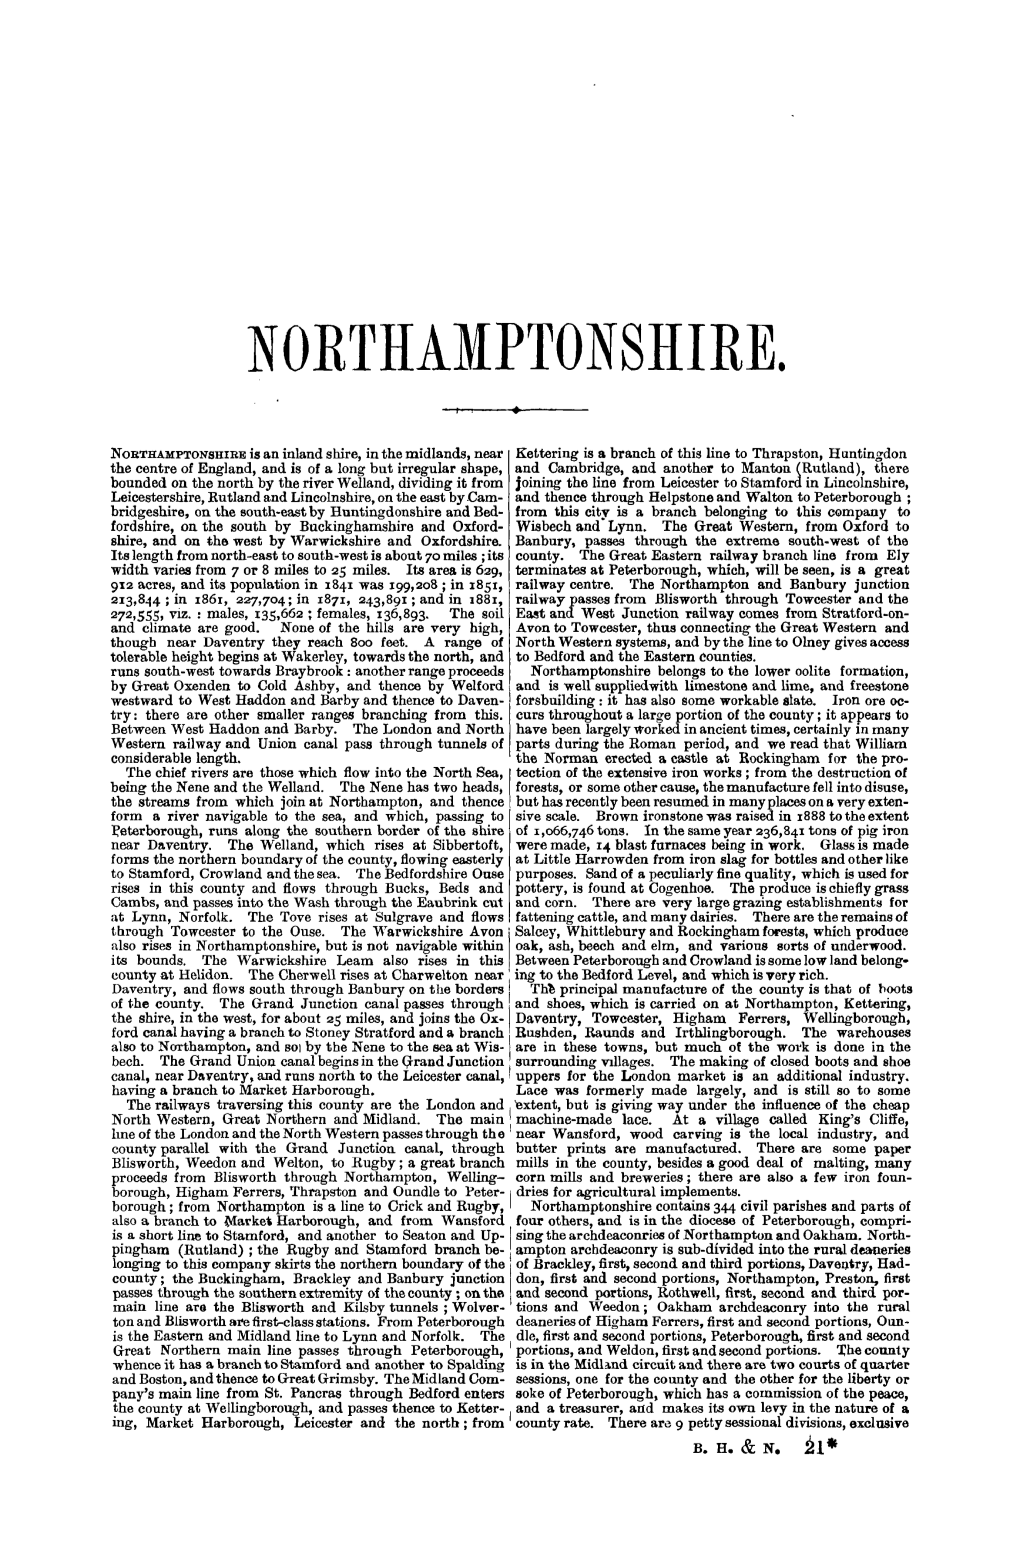 Page 1 • " +---NORTHAMPTONSHIRE Is an Inland Shire, Inthe